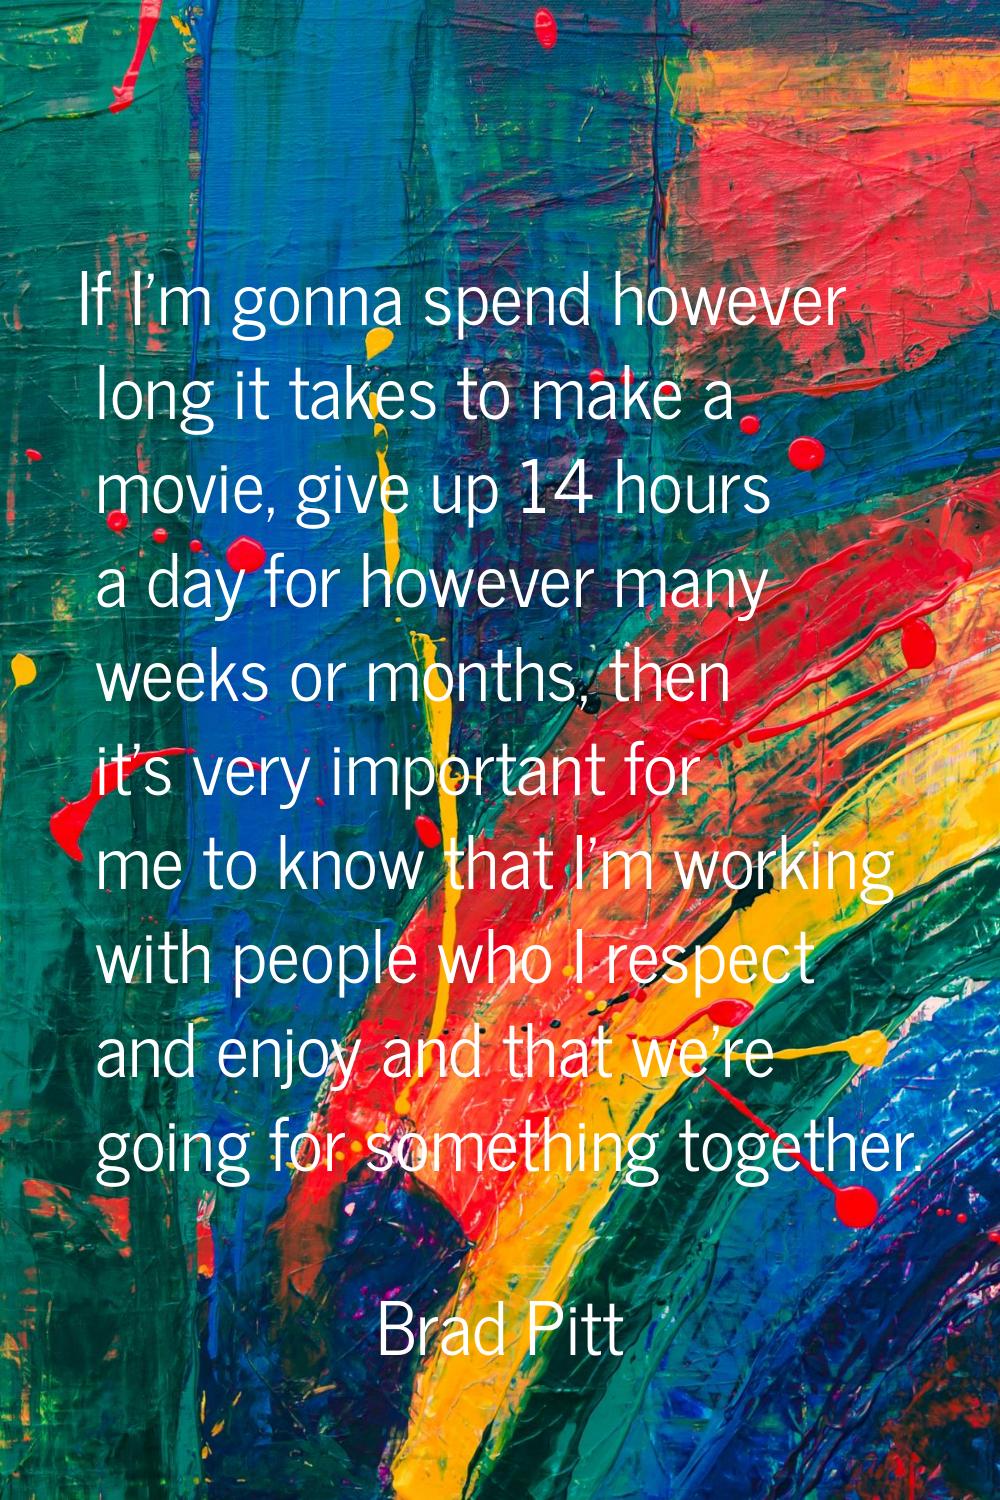 If I'm gonna spend however long it takes to make a movie, give up 14 hours a day for however many w